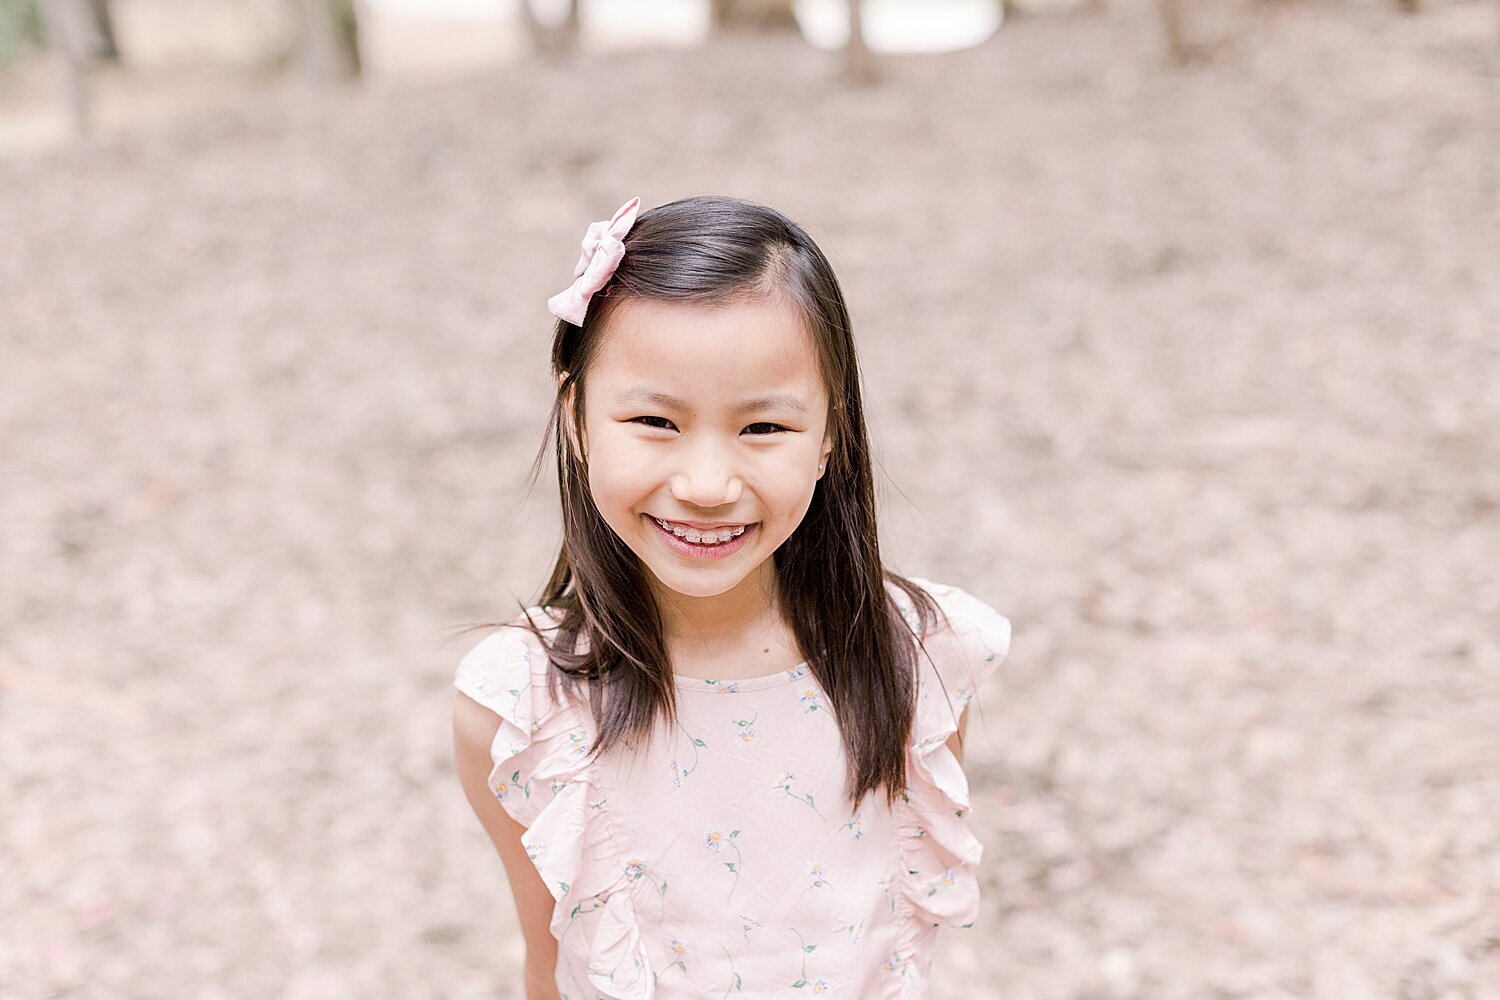 Children's portraits during family photos with Ambre Williams Photography.